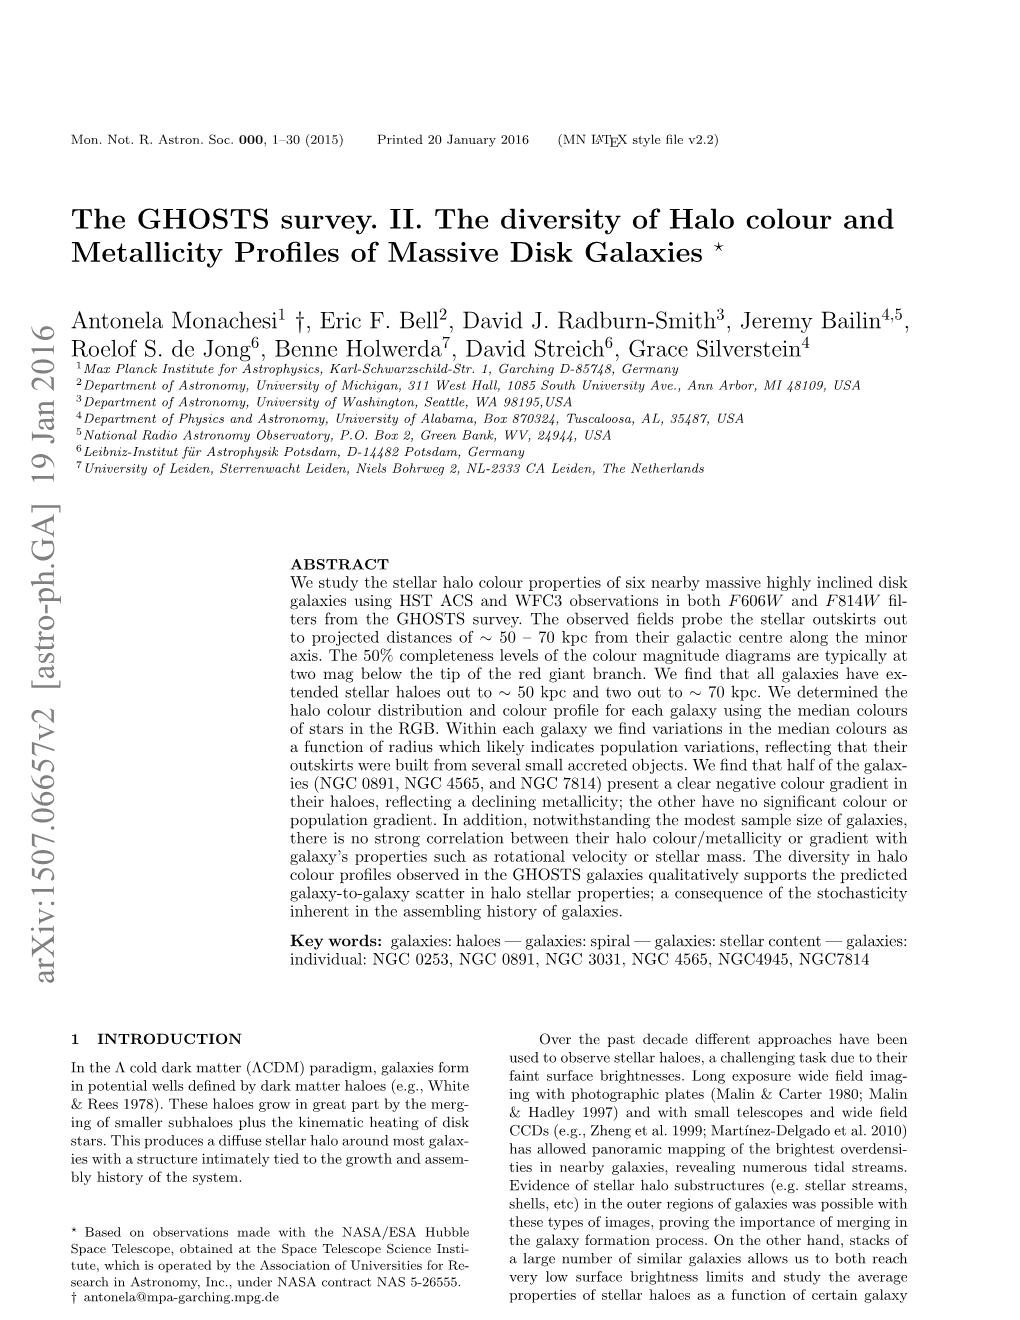 The GHOSTS Survey. II. the Diversity of Halo Color and Metallicity Profiles of Massive Disk Galaxies